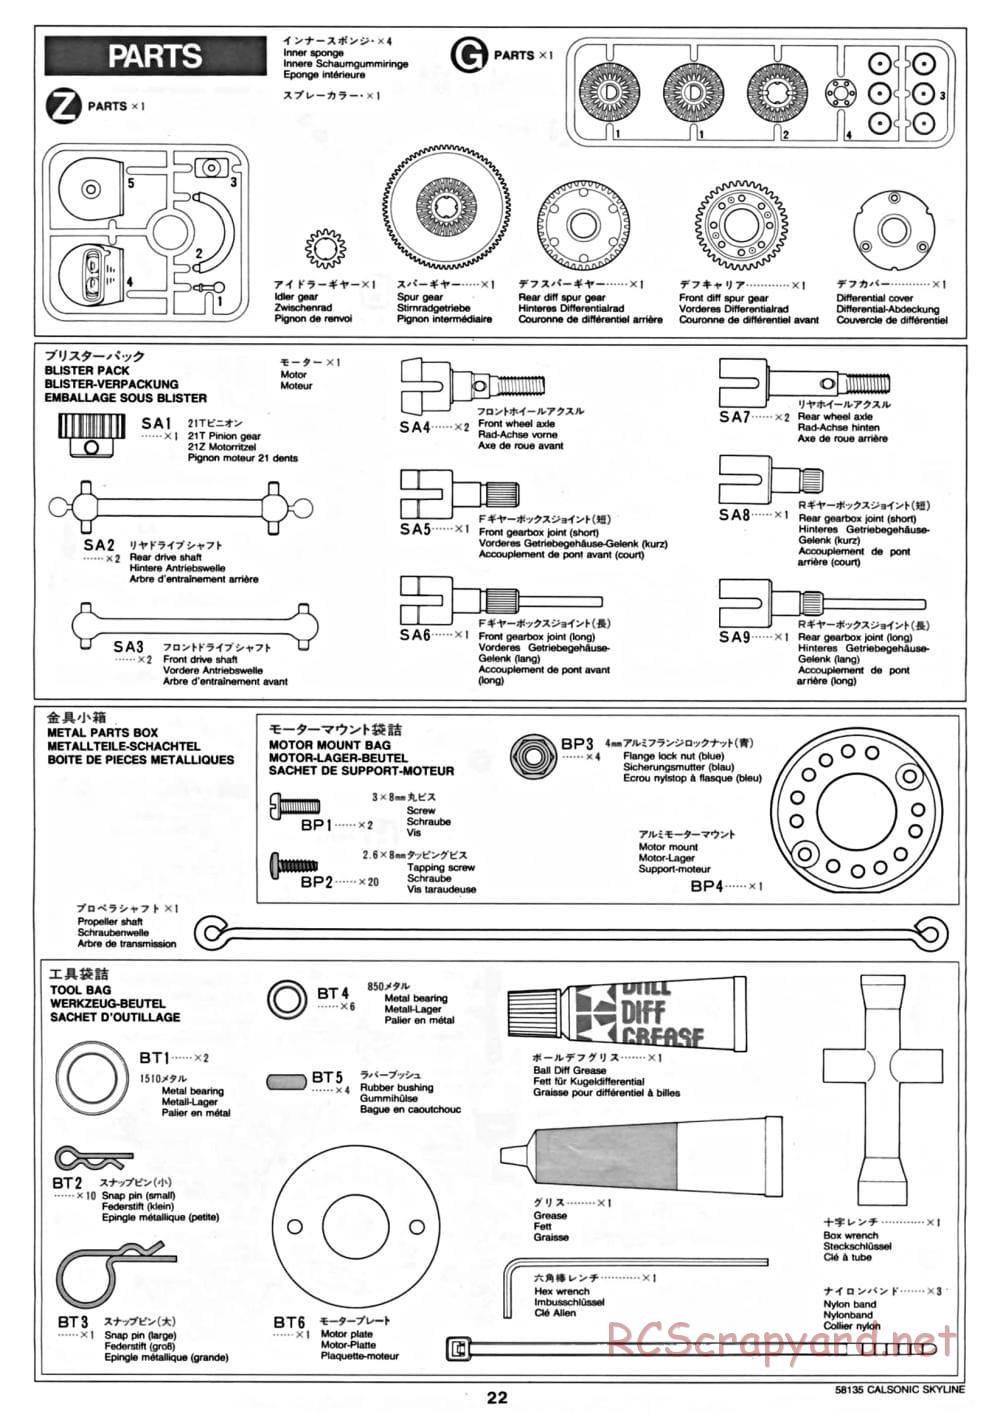 Tamiya - Calsonic Skyline GT-R Gr.A - TA-02 Chassis - Manual - Page 22